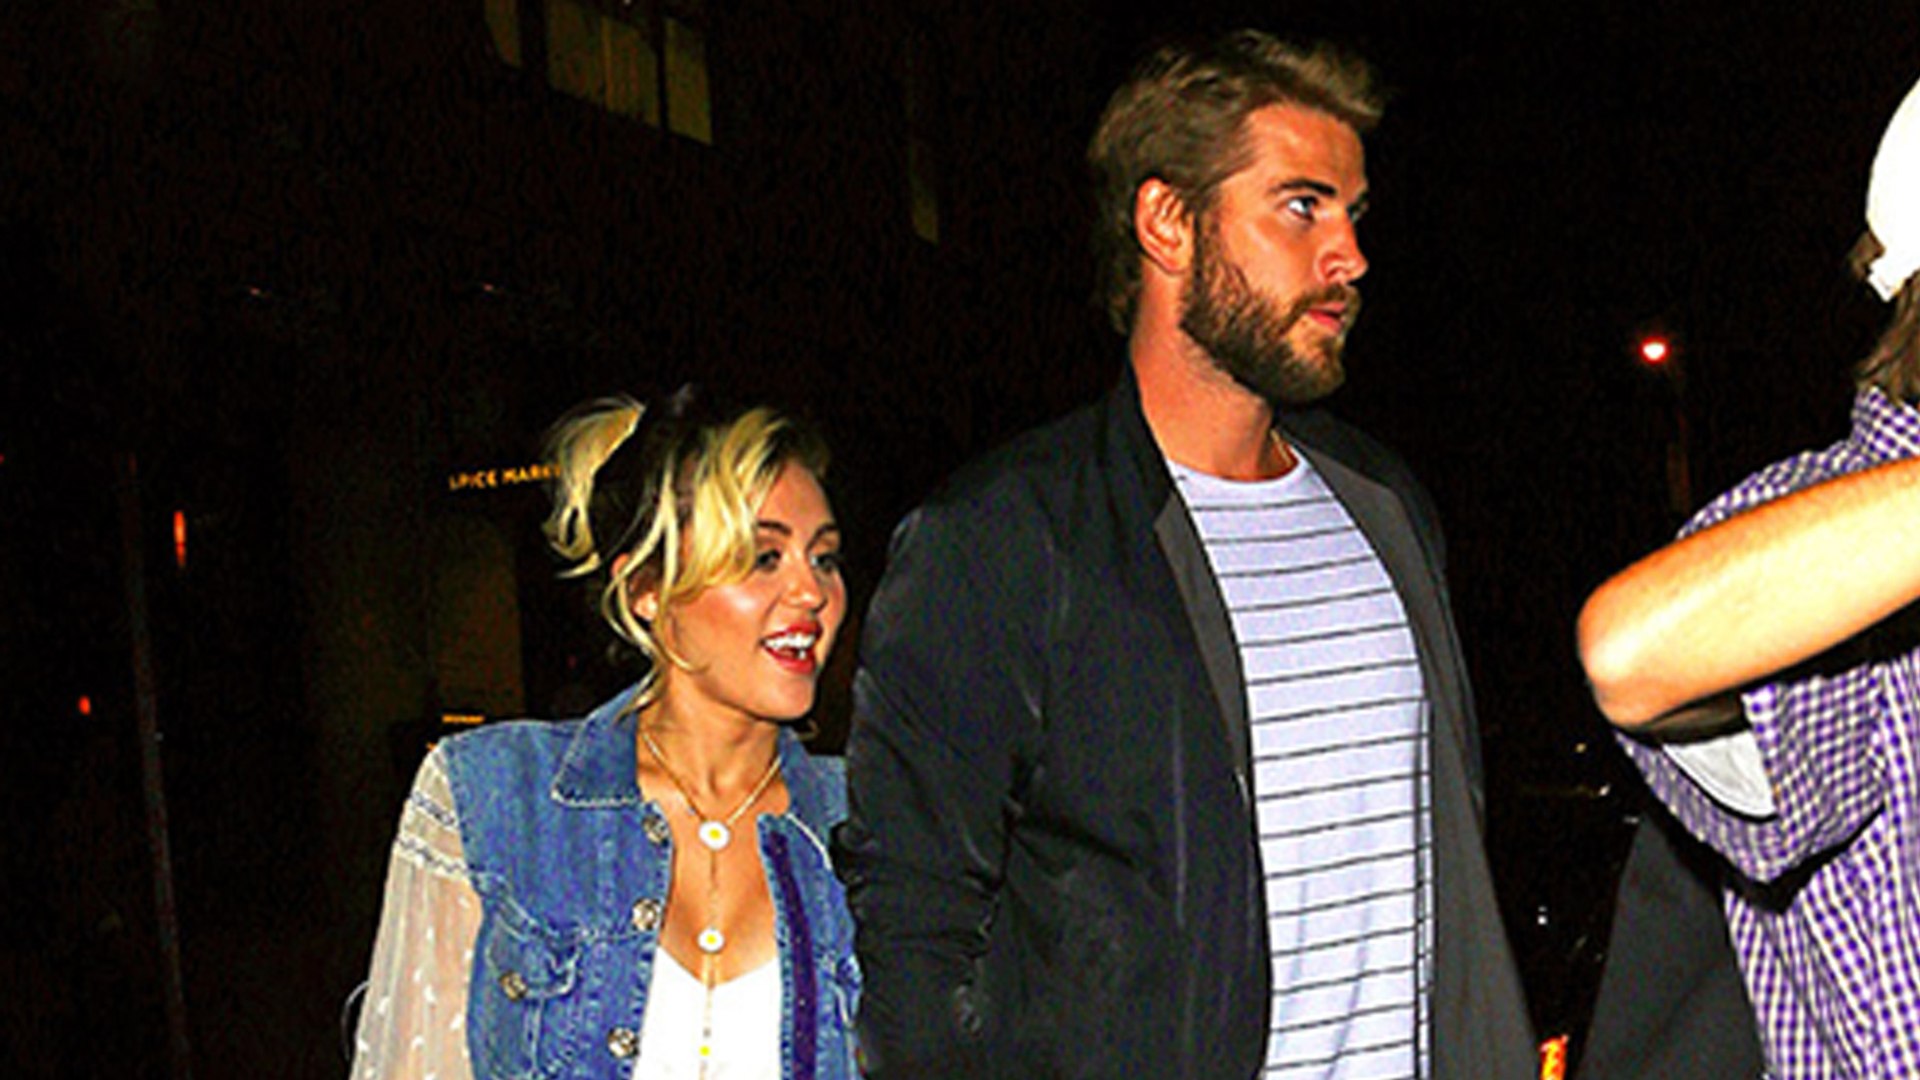 Miley Cyrus and Liam Hemsworth Pack On Sexy PDA During Date Night in NYC